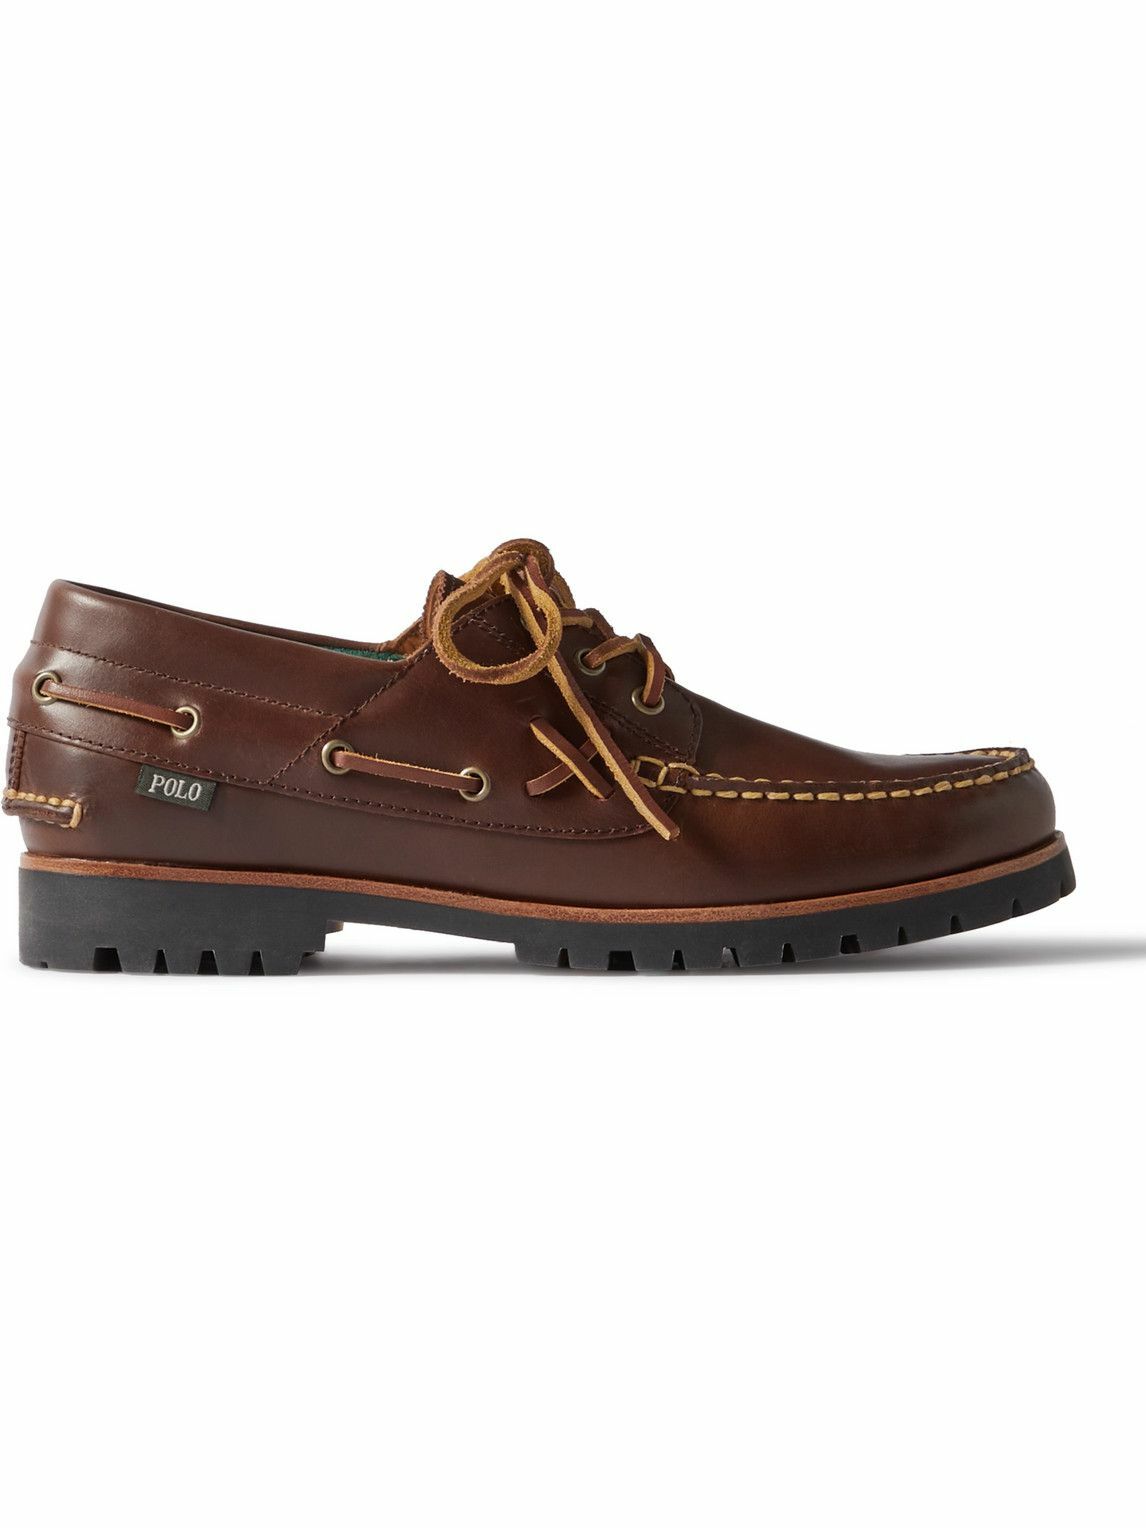 Polo Ralph Lauren - Ranger Deck Leather Boat Shoes - Unknown Polo Ralph ...